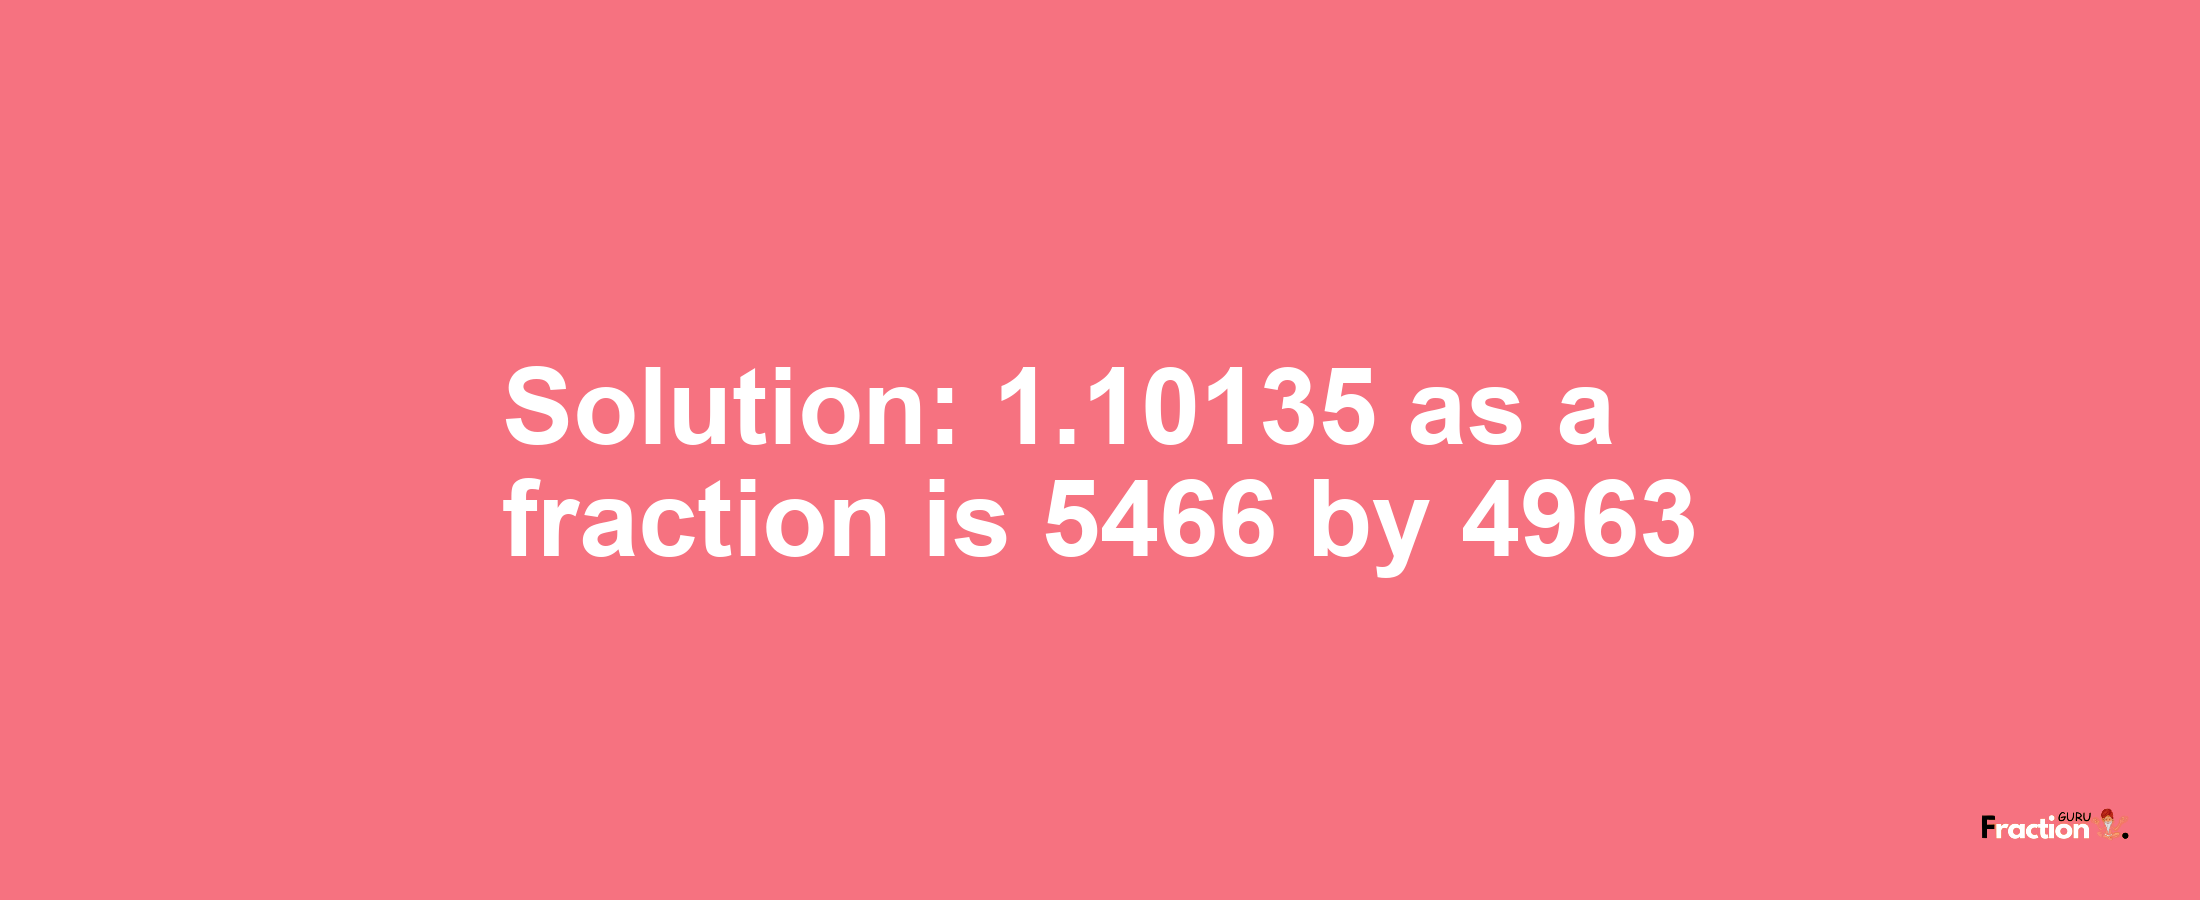 Solution:1.10135 as a fraction is 5466/4963